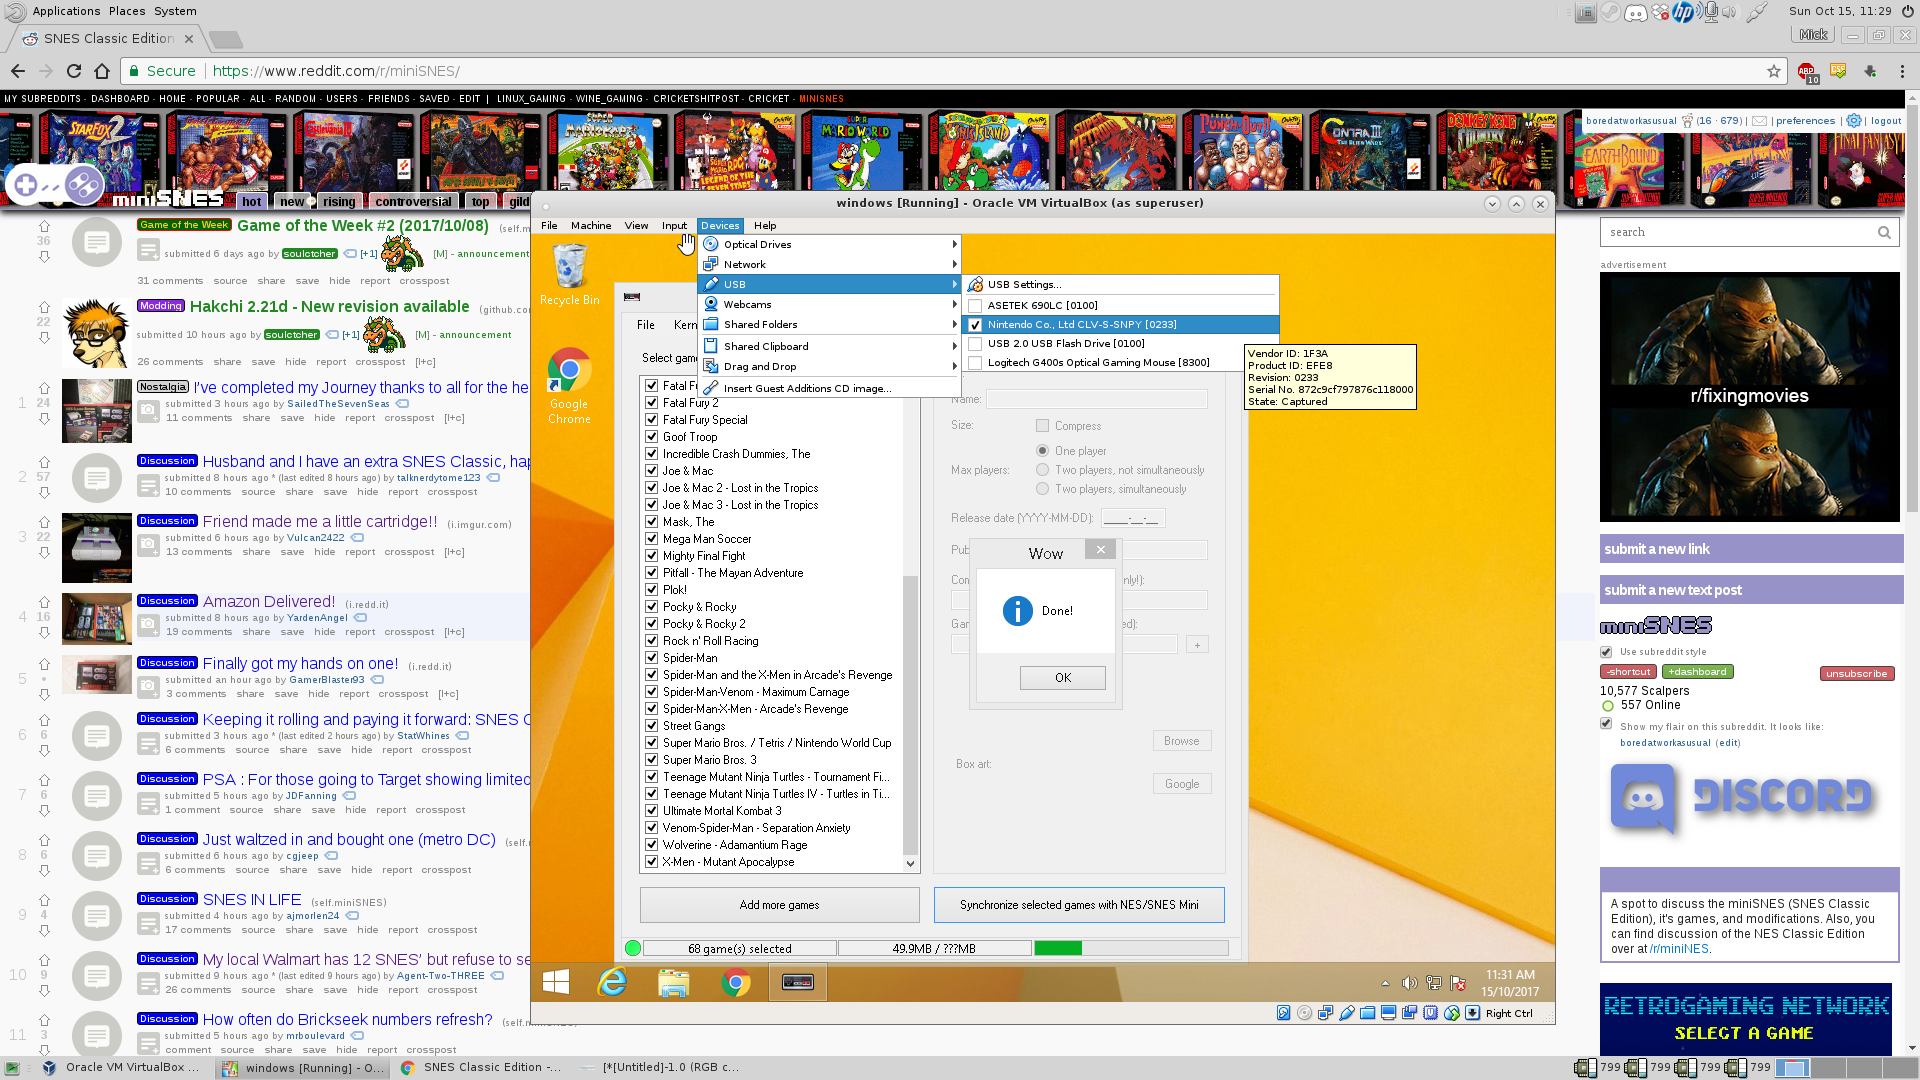 vmware player for mac m1